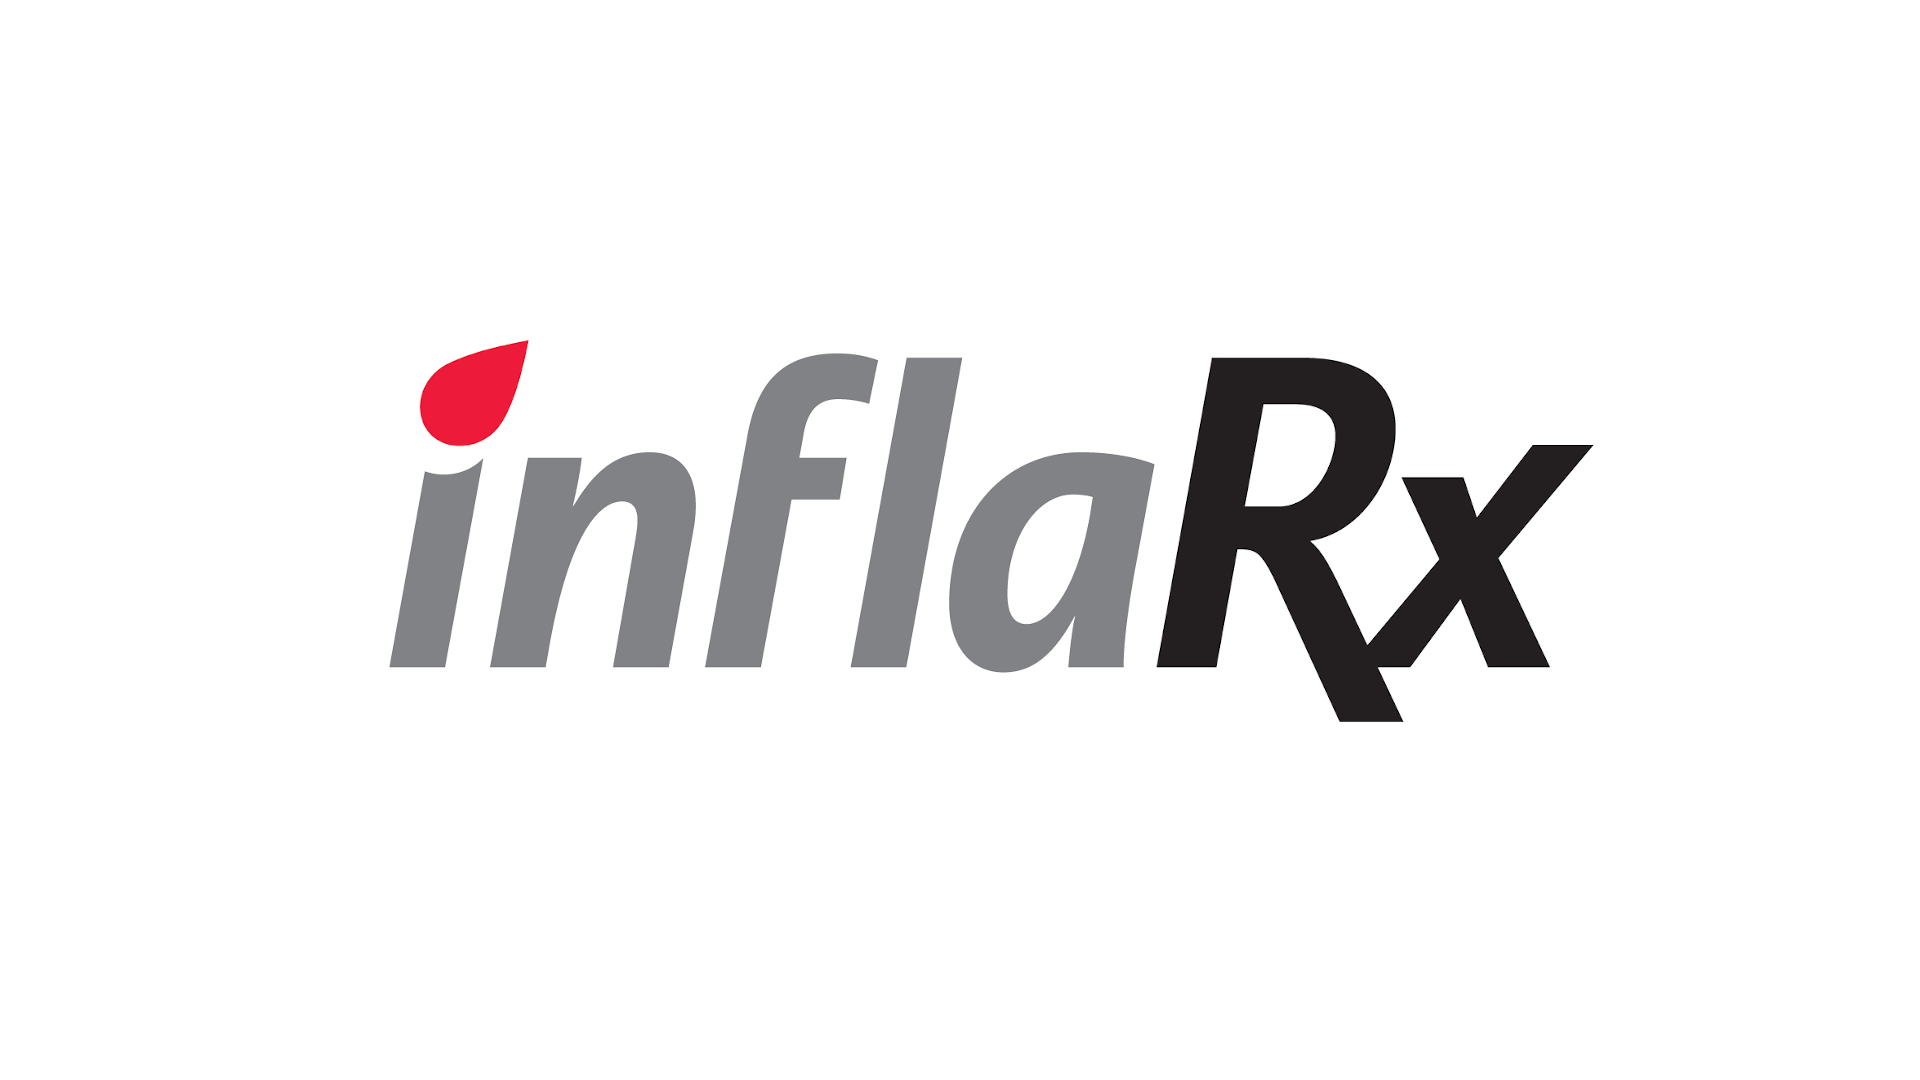 InflaRx Announces Amendment of Co-Development Agreement and Additional Equity Investment by Staidson in Connection with Regulatory Filing in China for Anti-C5a-Antibody for Treatment of COVID-19